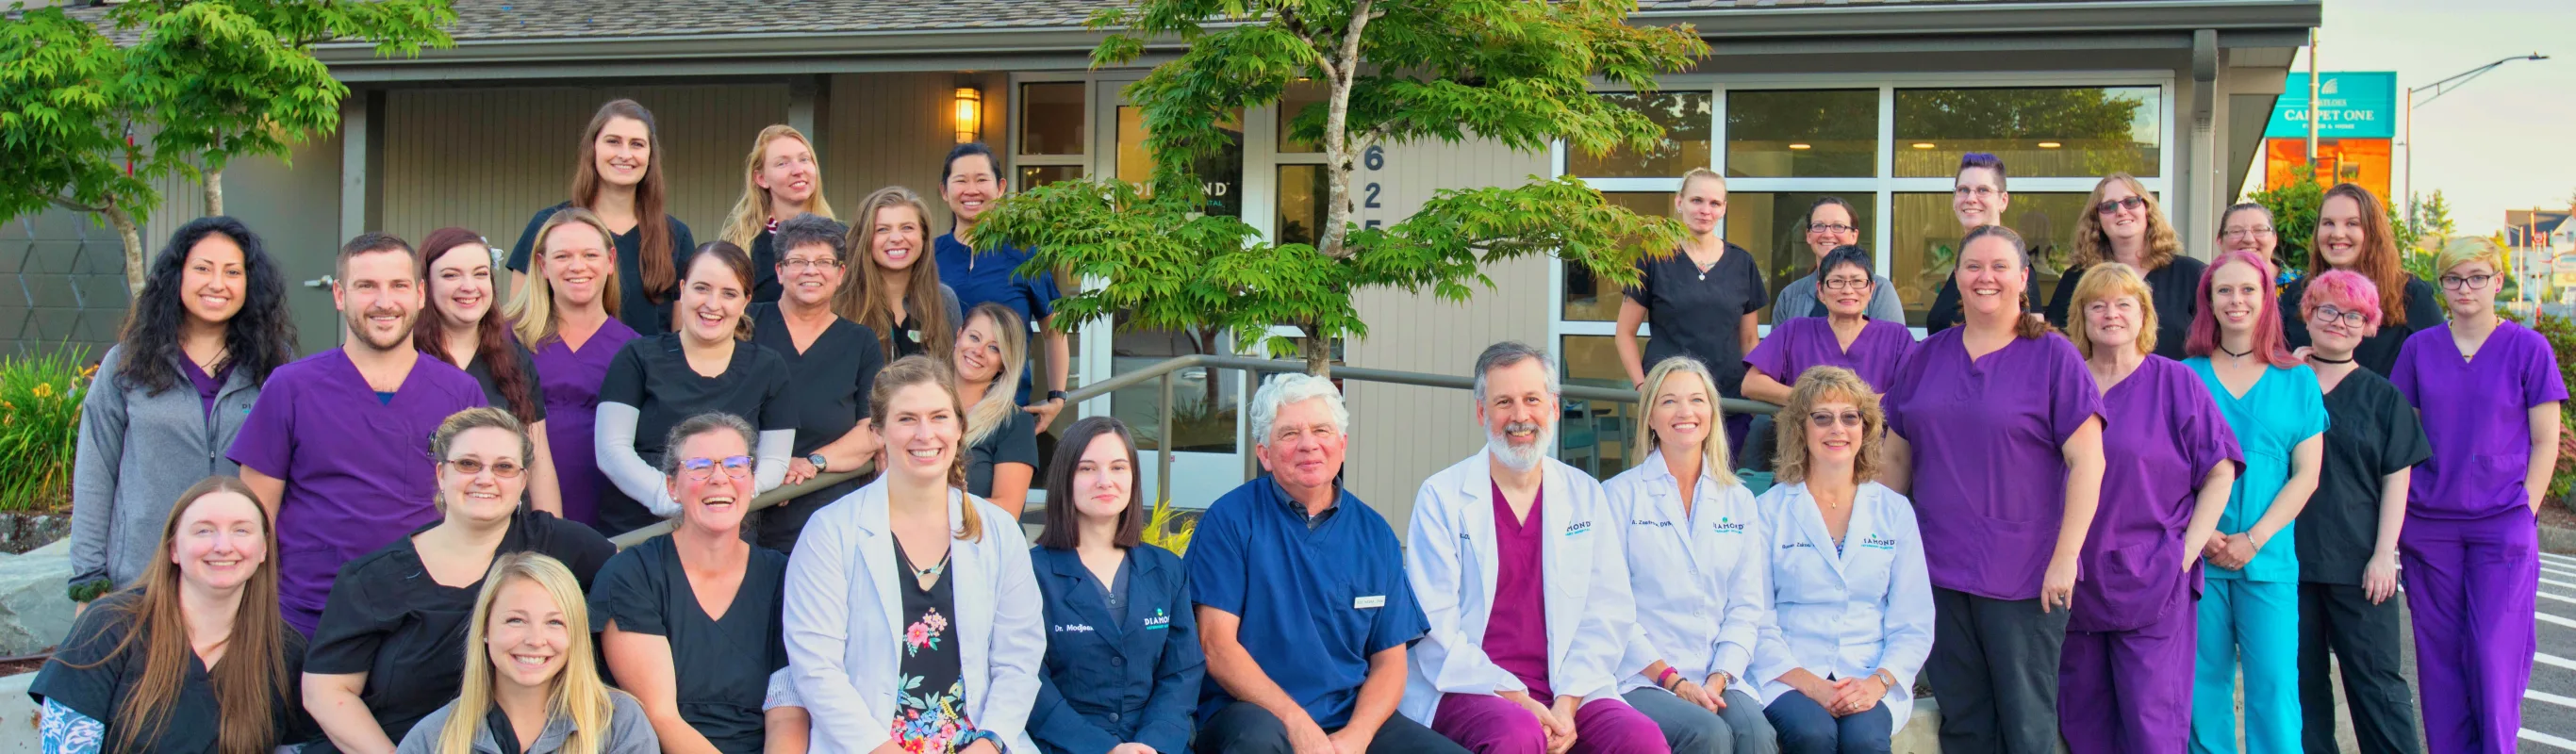 Group photo of veterinary staff in front of a hospital